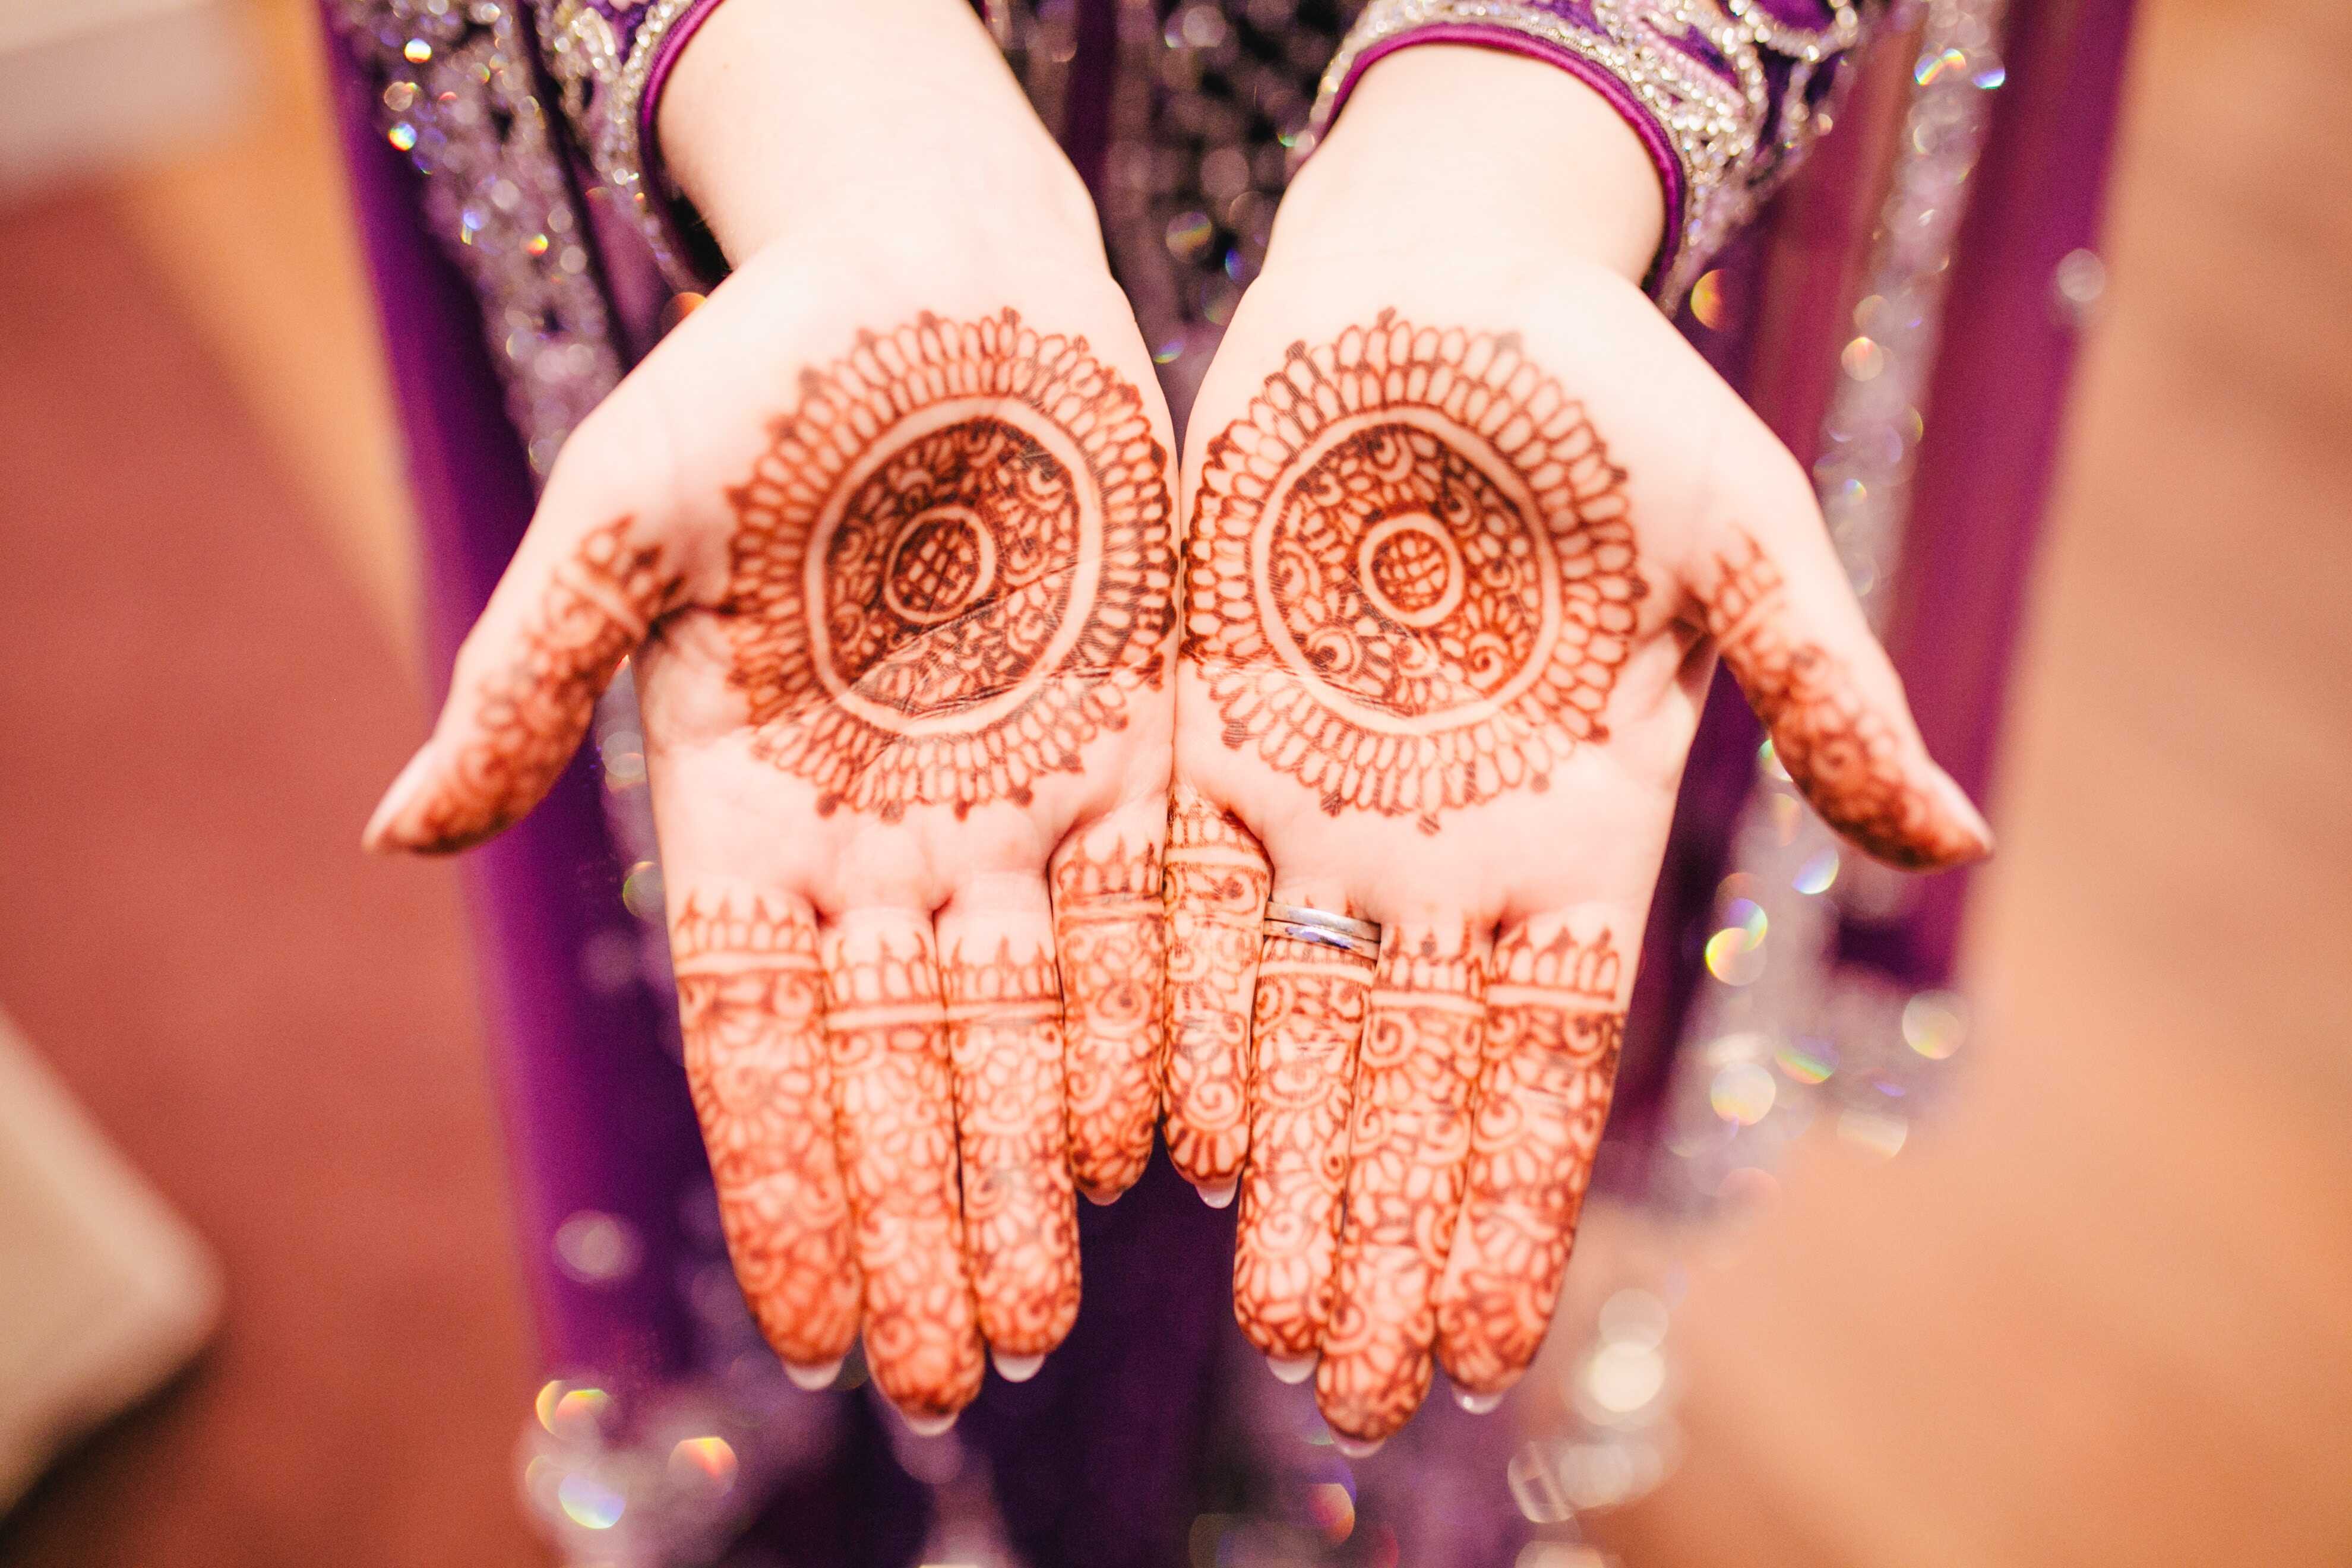 Intricate henna tattoo designs on the palms of a woman’s hands